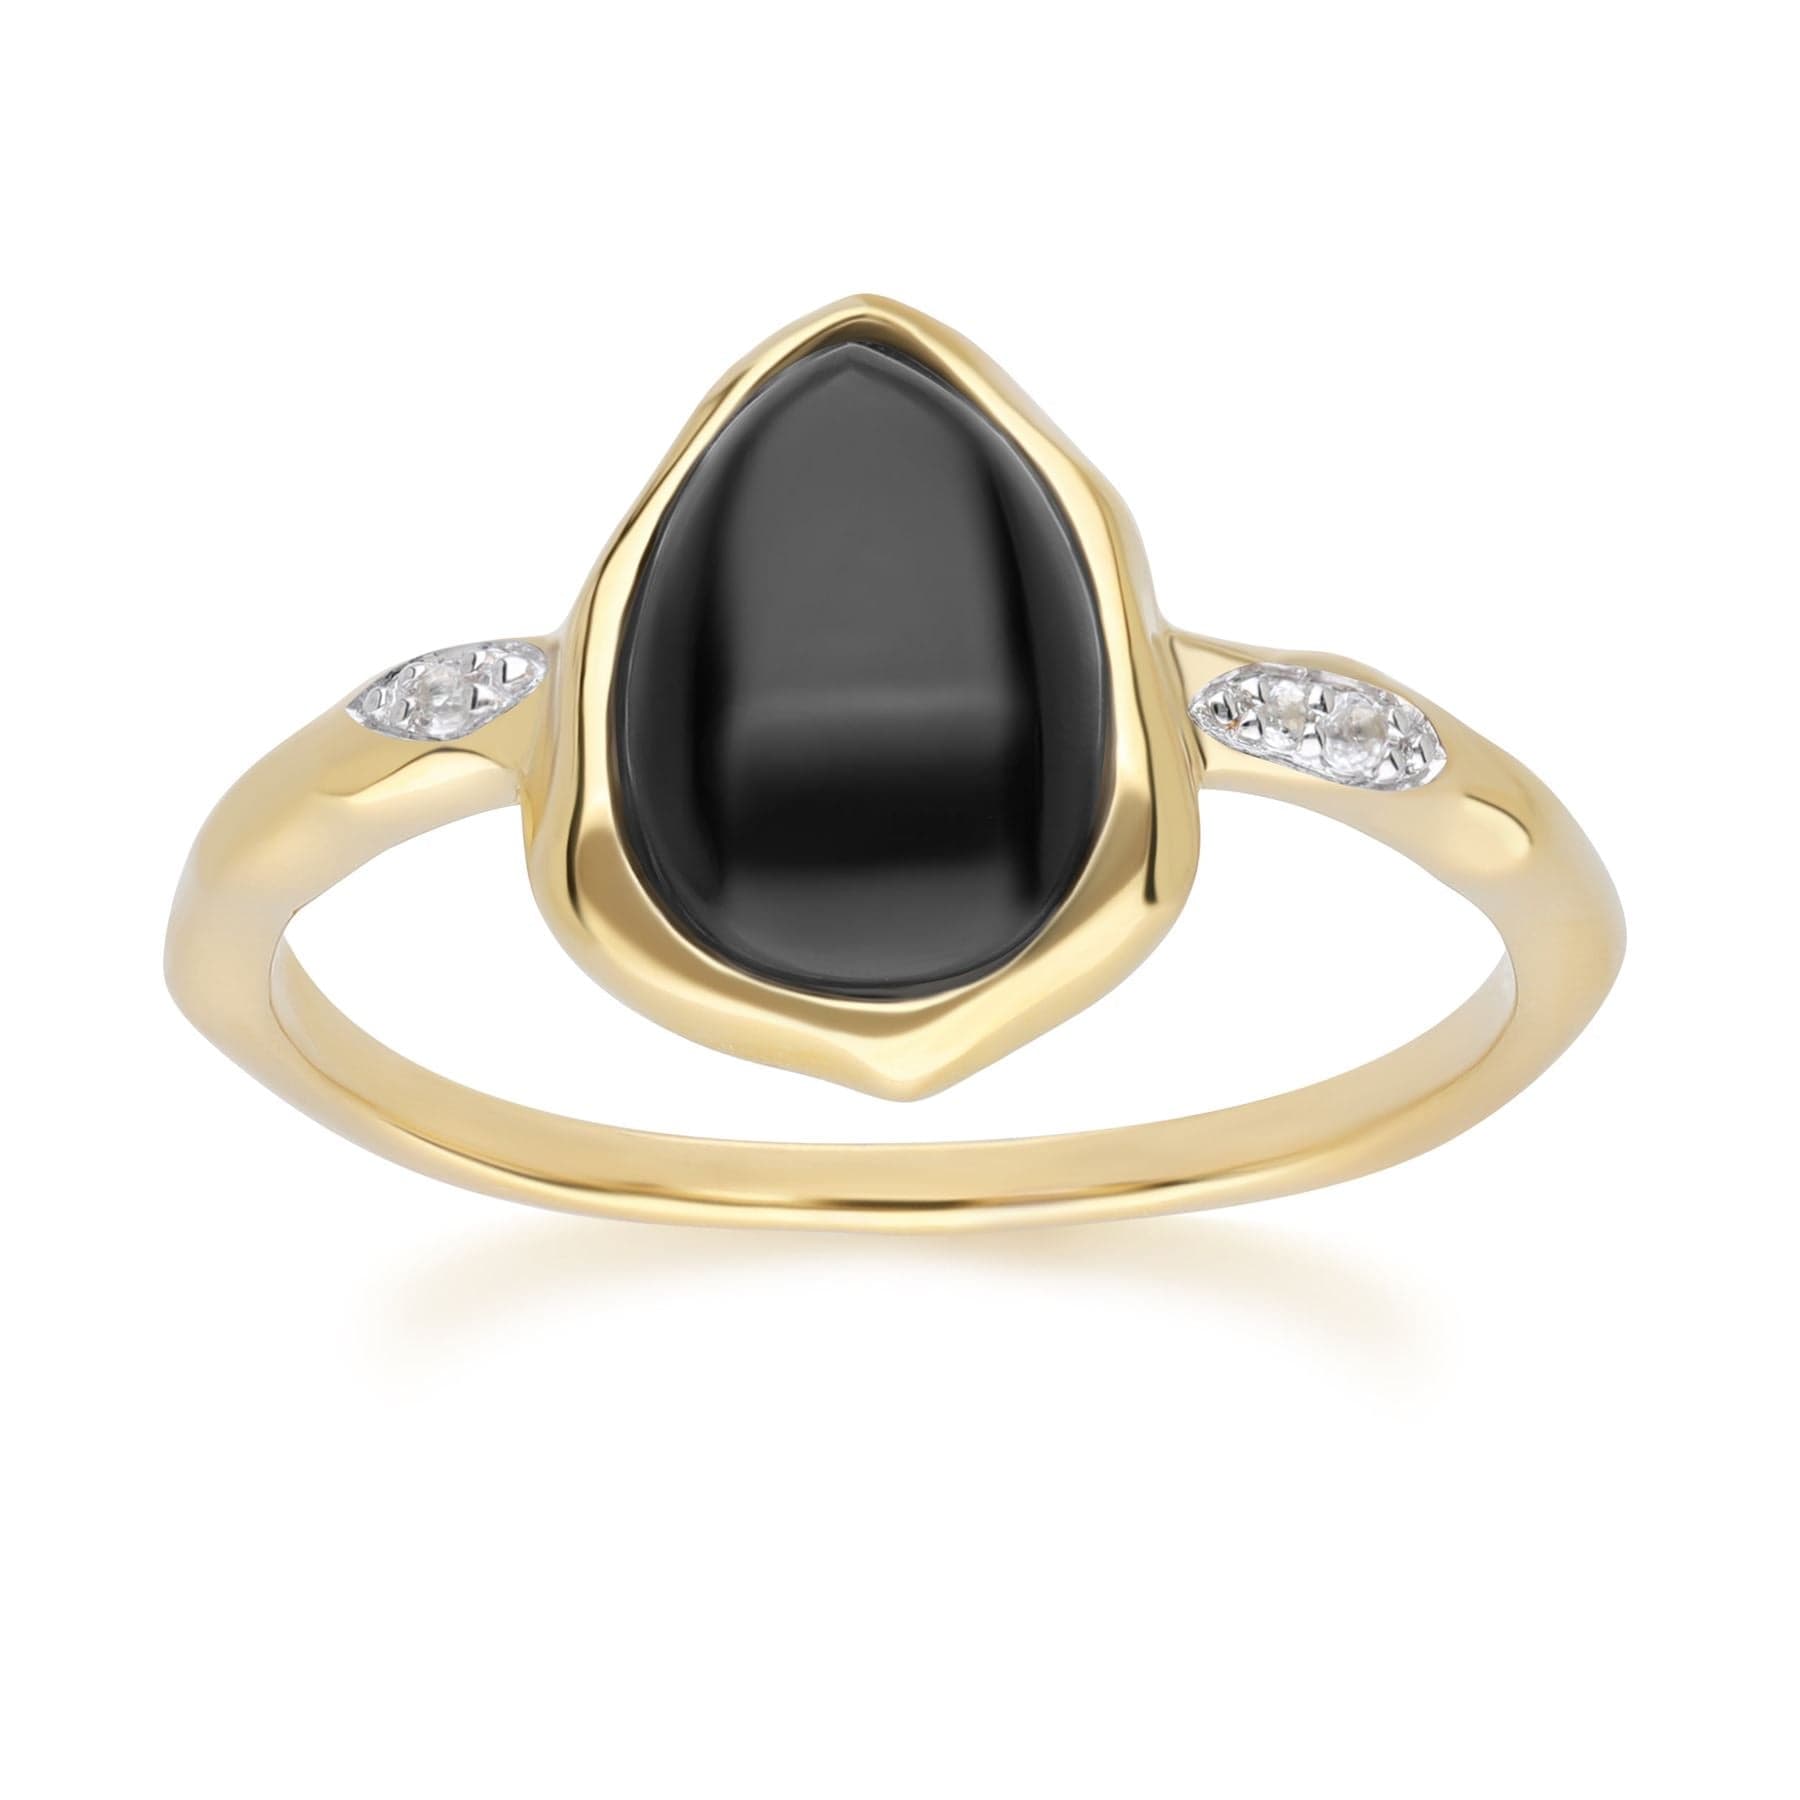 Irregular Black Onyx & Topaz Ring In 18ct Gold Plated SterlIng Silver